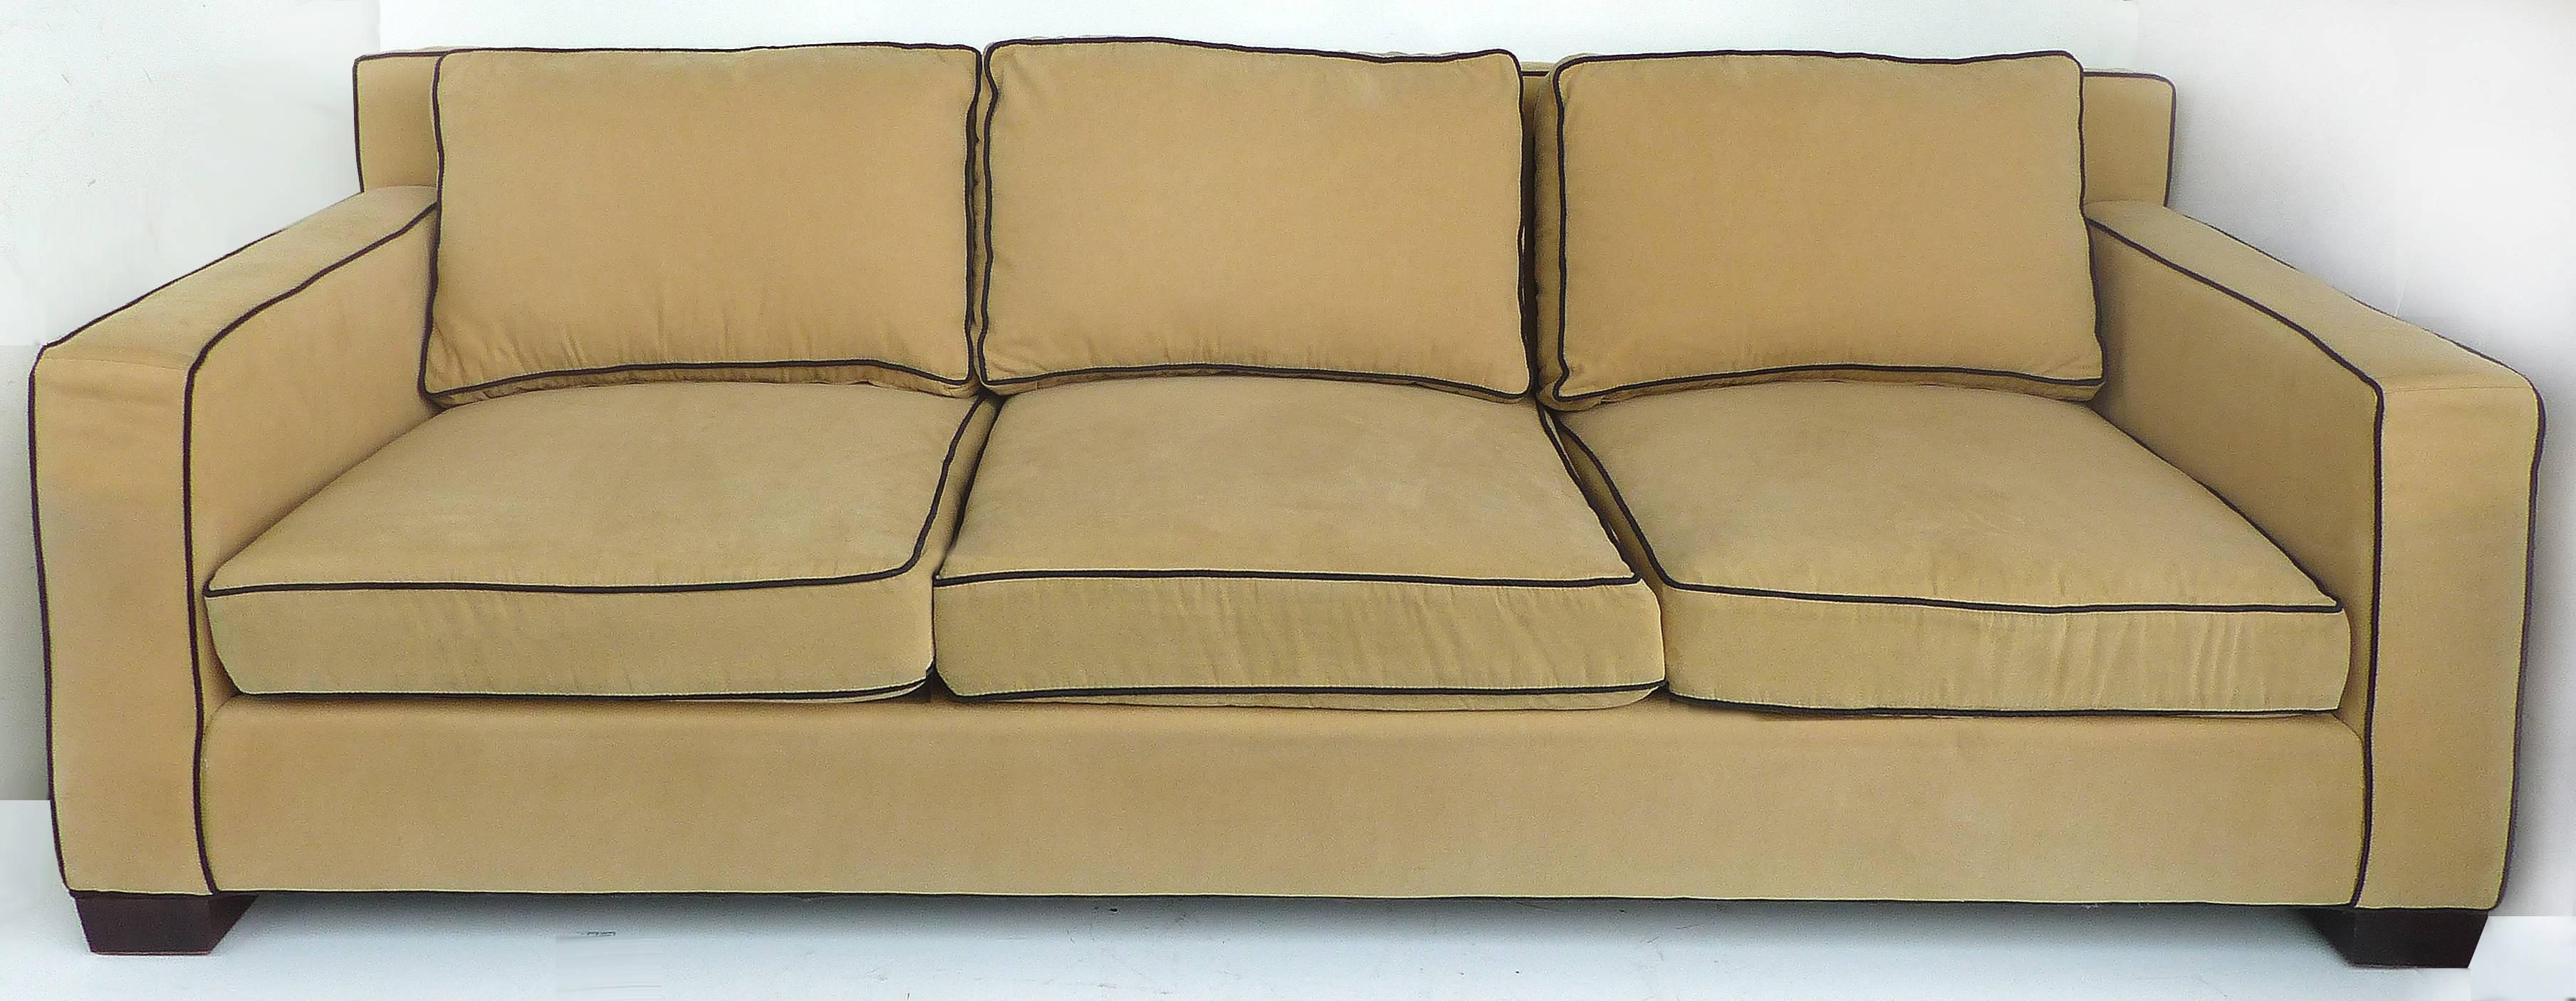 Offered for sale is the Ralph Lauren Graham Sofa. With its Classic lines and upholstered in ultra fine velvet in colorway camel color with black contrast piping (65% polyester and 35% cotton). Features 100% down filled seat cushions and back